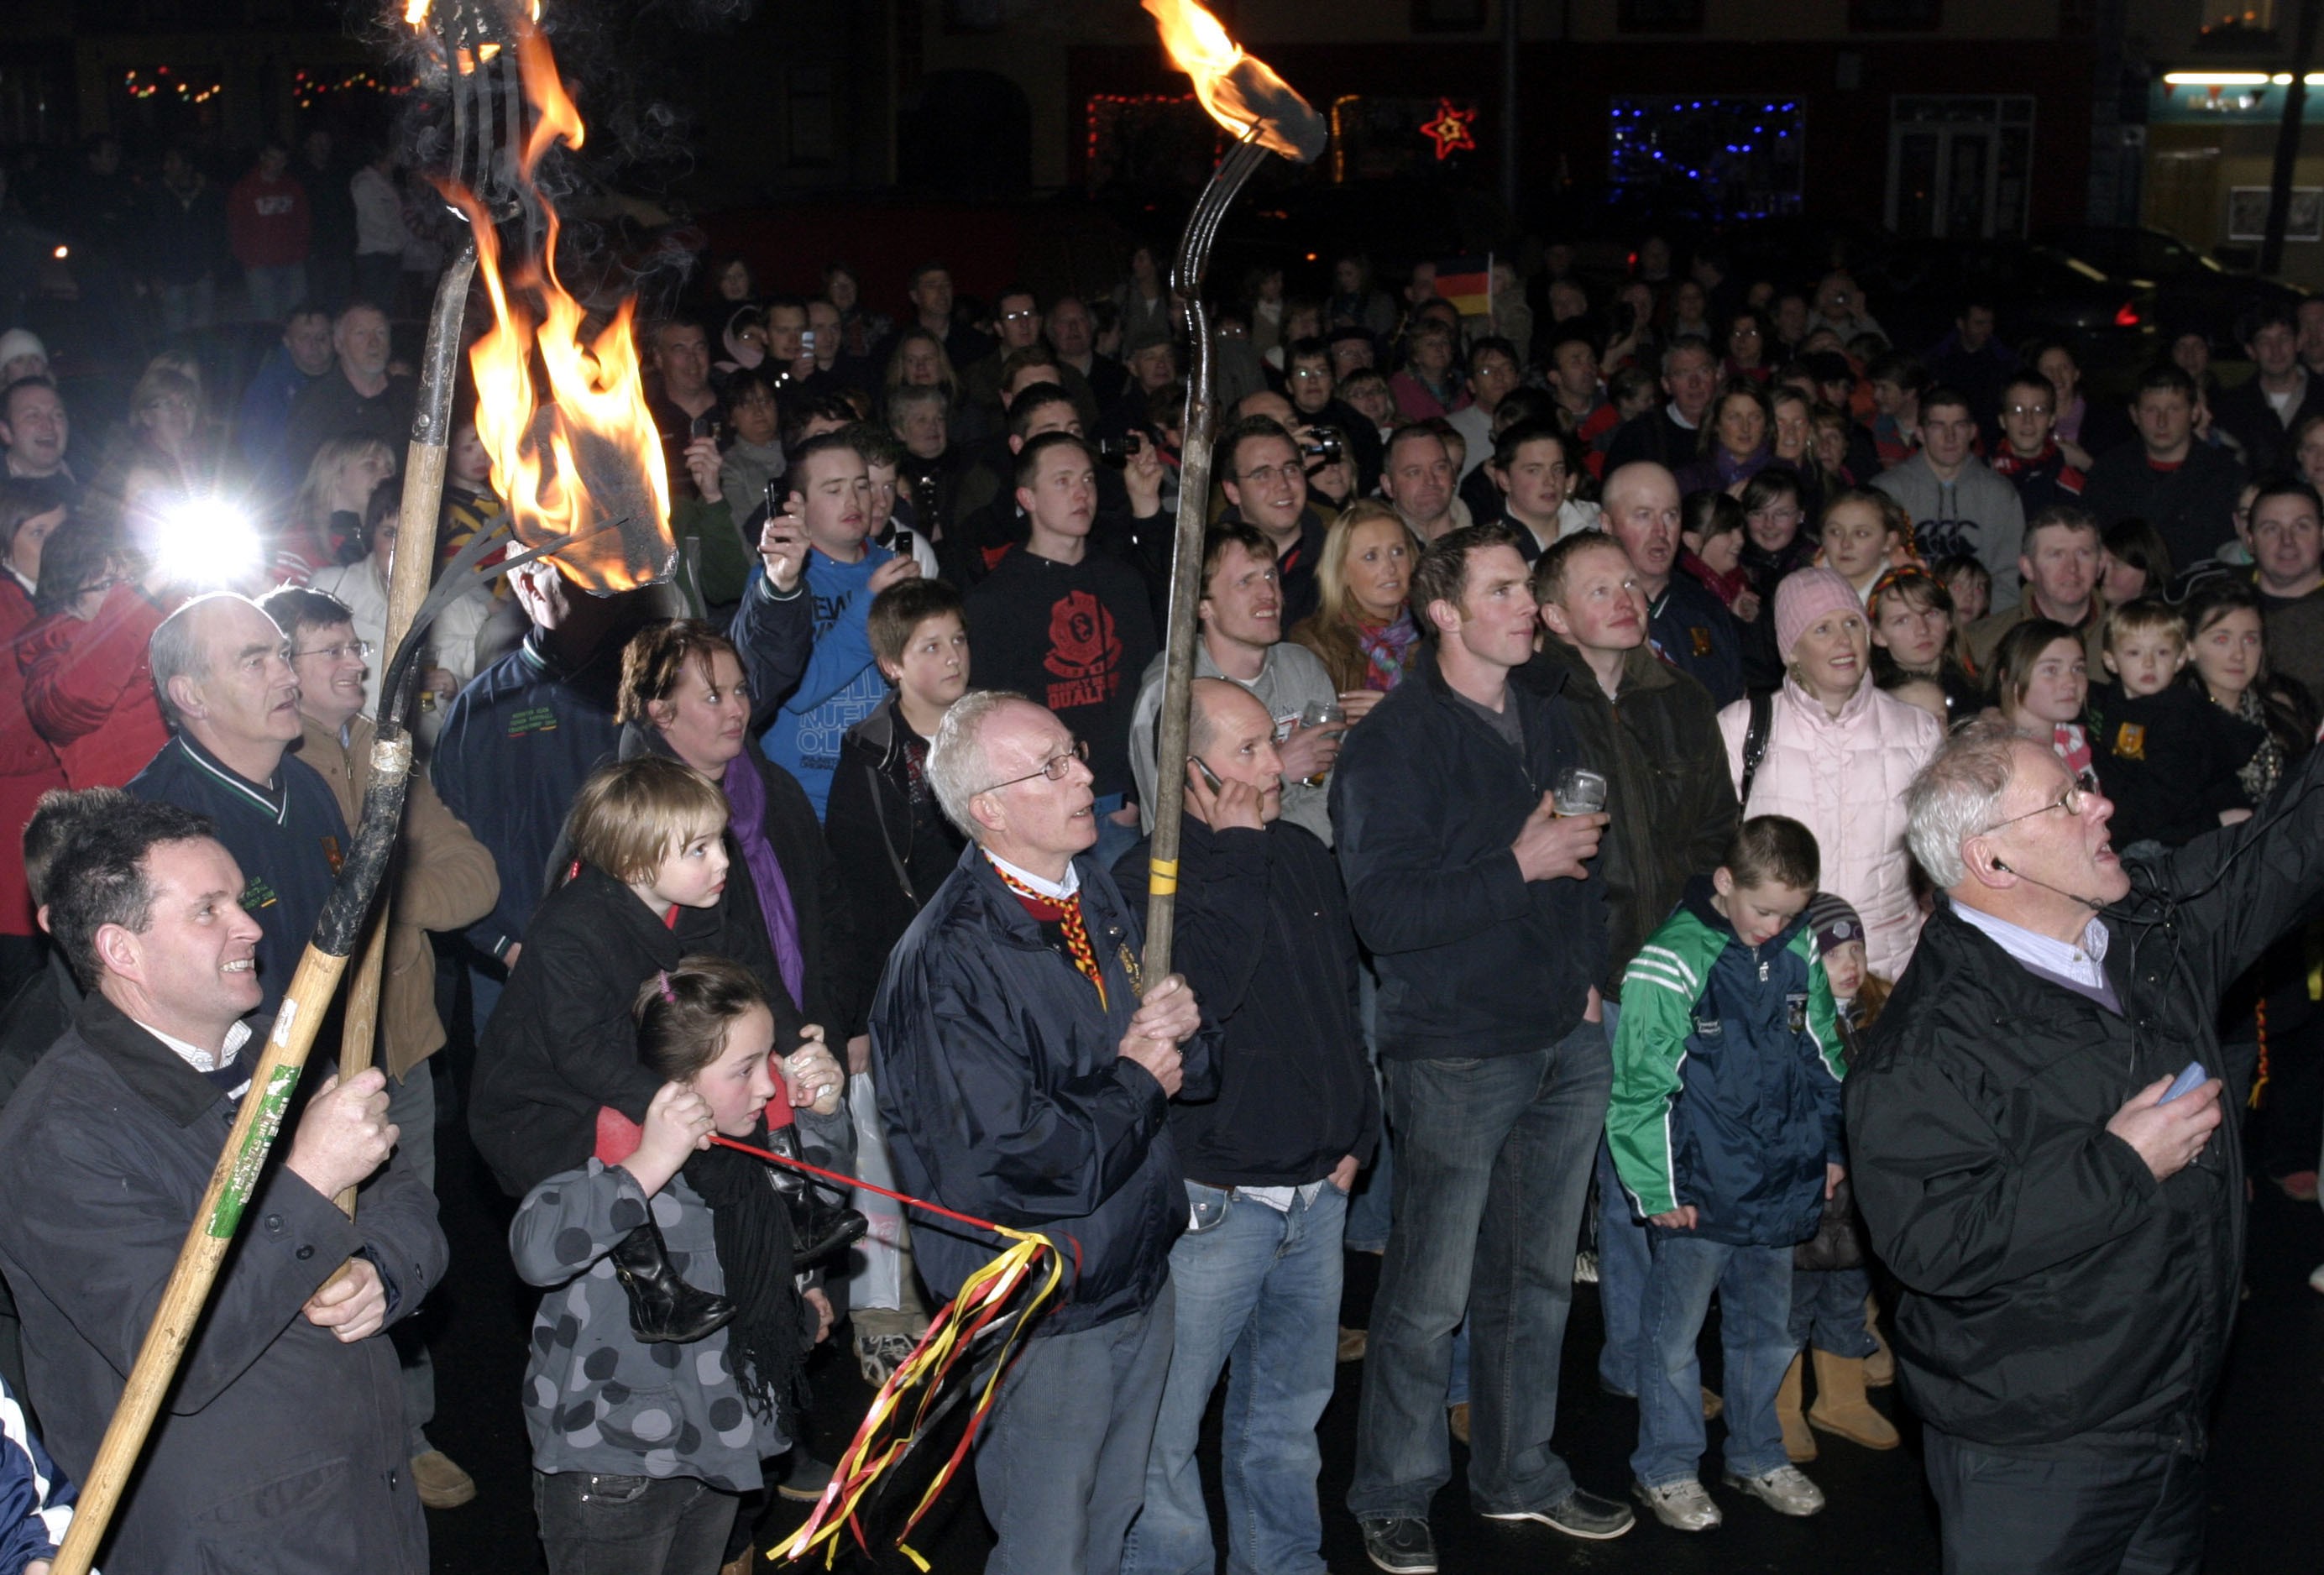 A scene from a Drumcollogher-Broadford GAA victory homecoming celebration. Note the lit turf burning on pitchforks in the foreground. The carrying of lit turf and the burning of bonfires are traditional GAA homecoming celebration rituals.